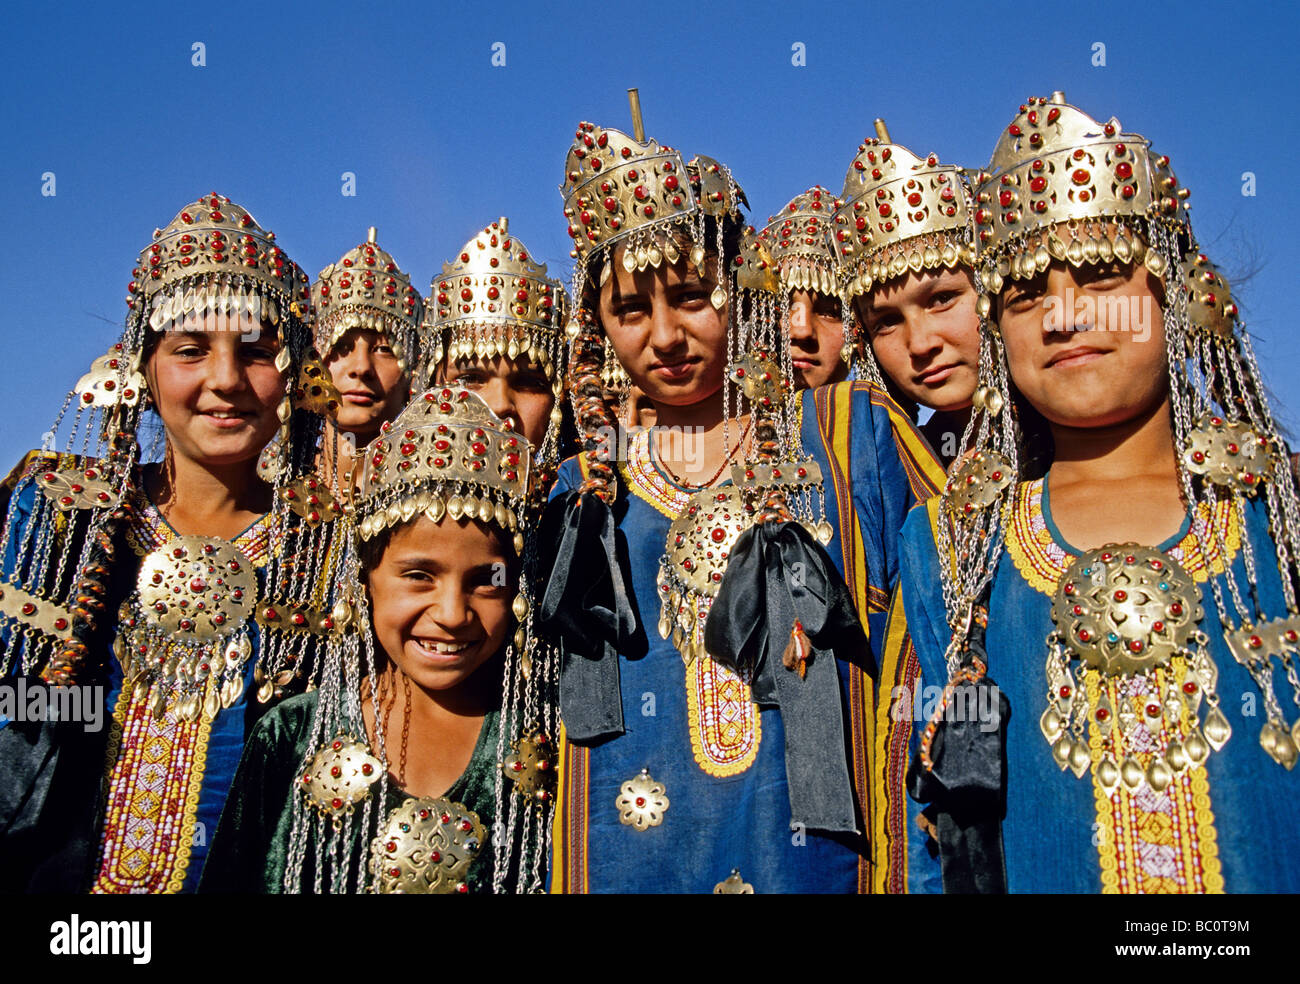 Turkmen school girls in traditional costume for public performance Stock Photo